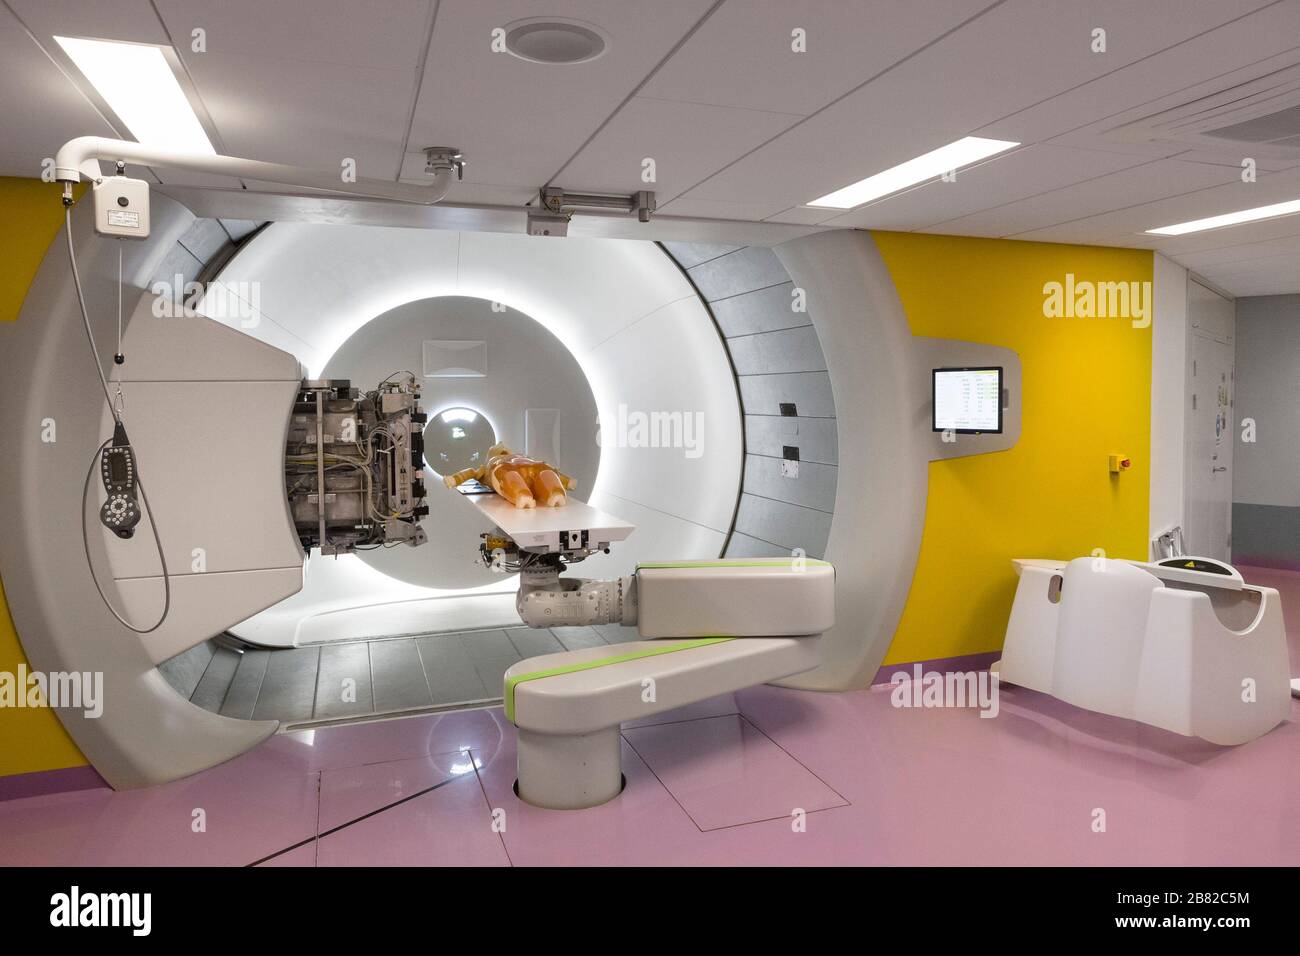 Test dummy at a cancer Radiation Proton beam therapy treatment room in hospital. Uppsala, Sweden. Stock Photo